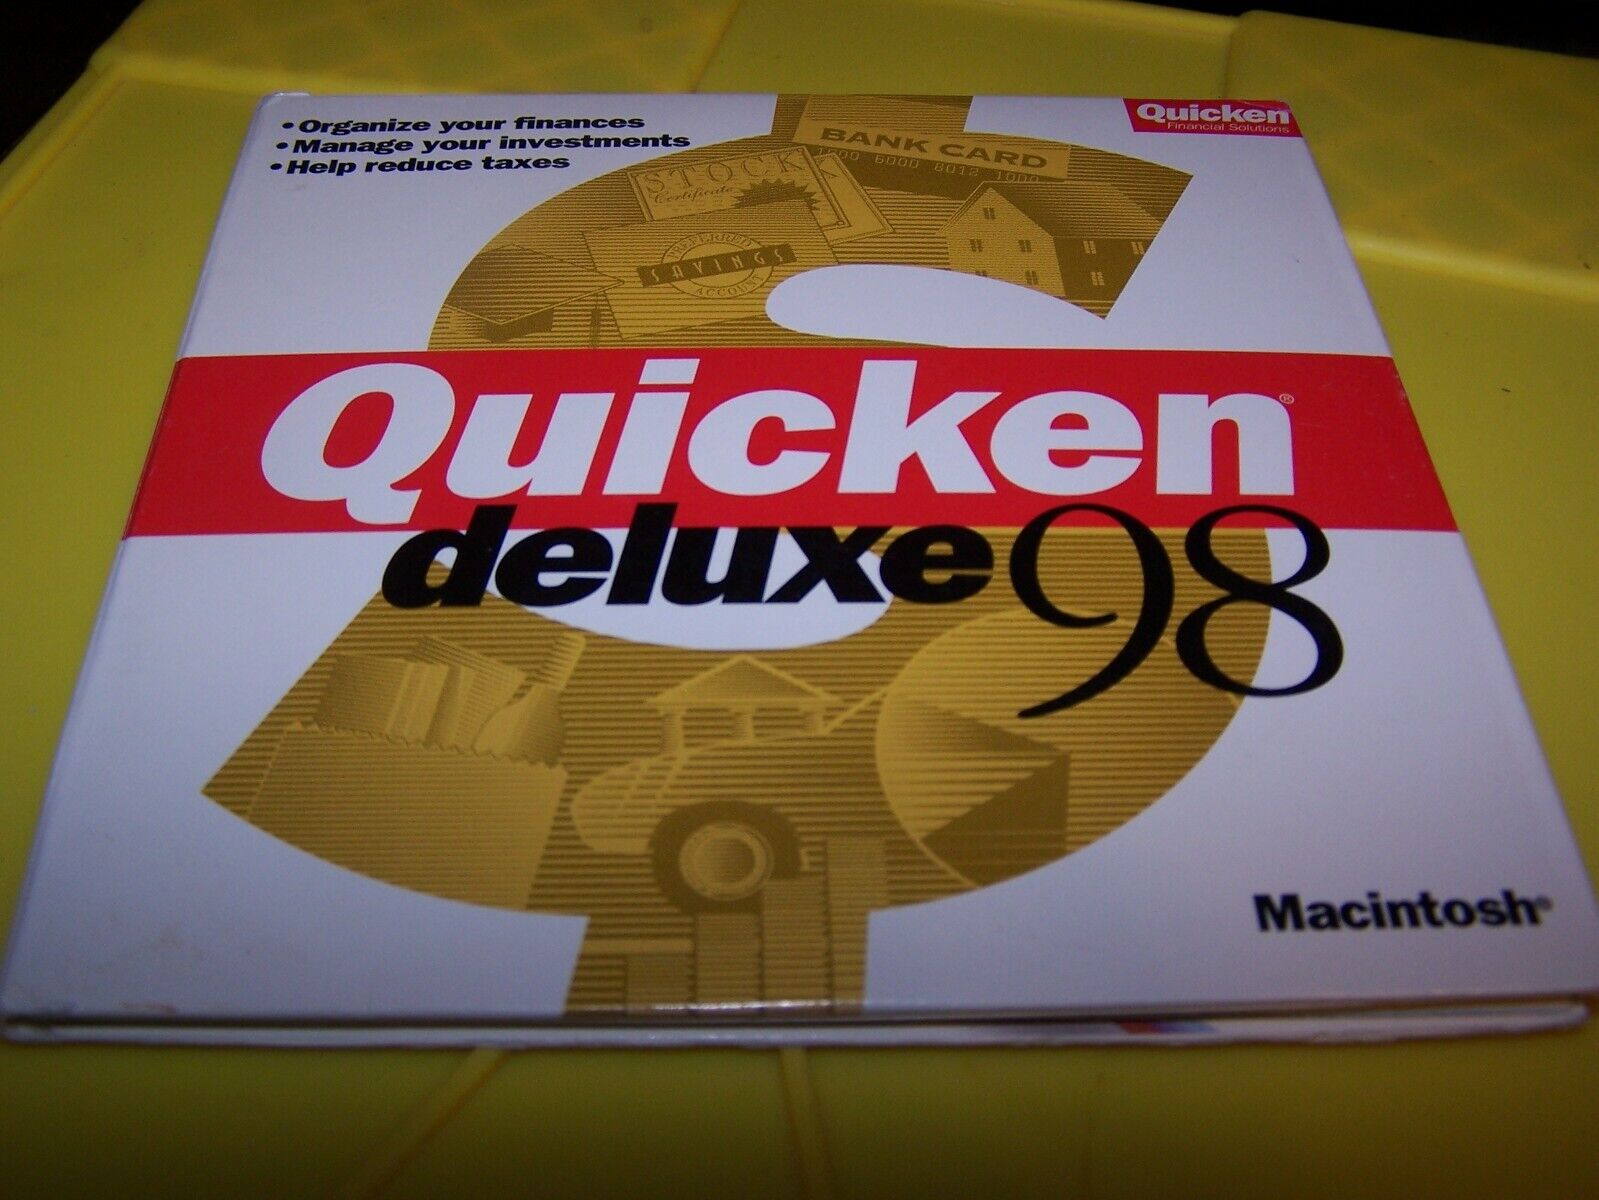 Vintage Quicken deluxe 98 CD for PC SOLD AS IS